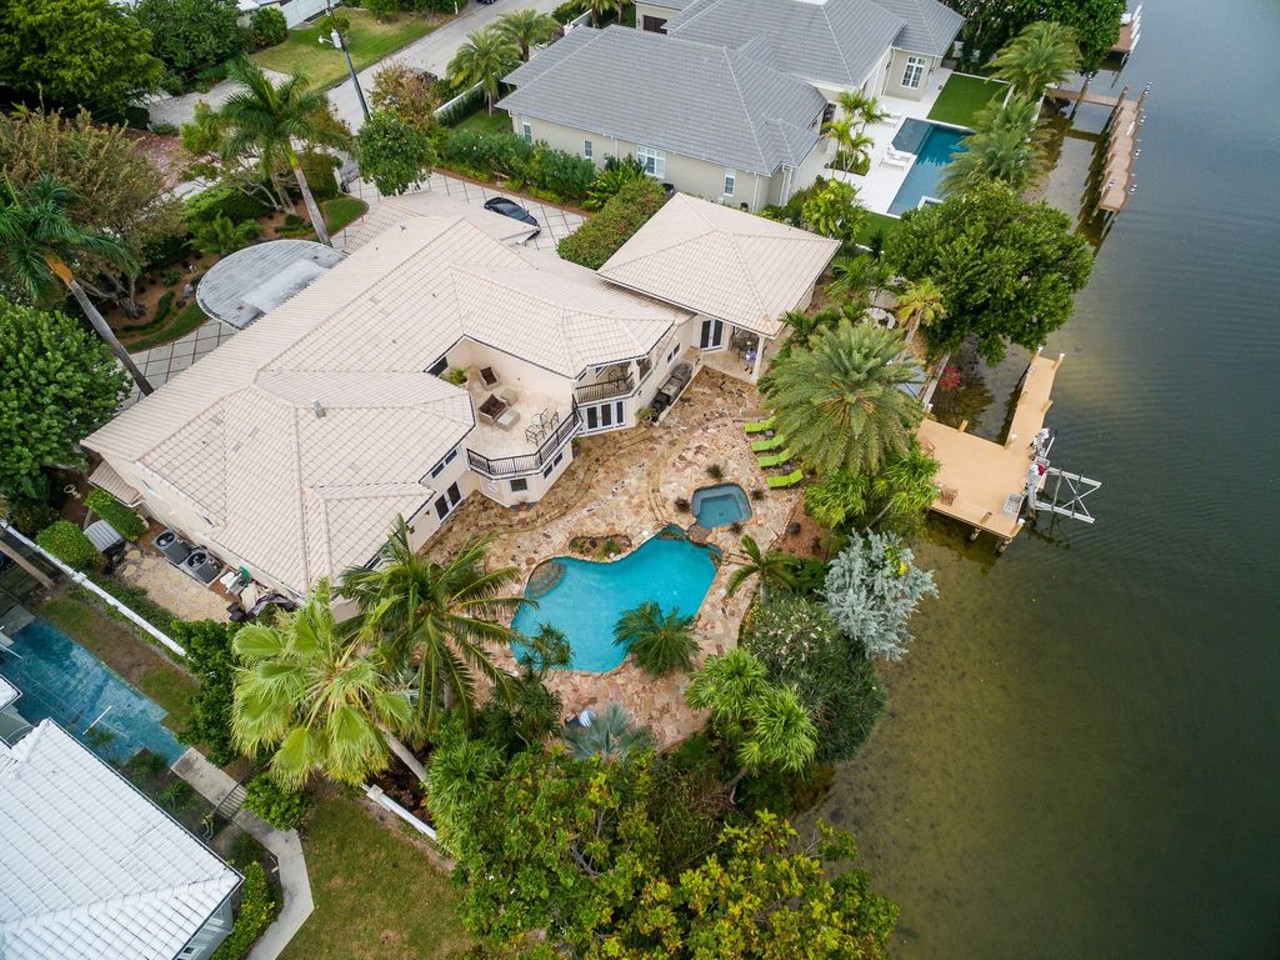 David Cassidy's former Florida mansion is on the market for $3.9 million, let's take a tour